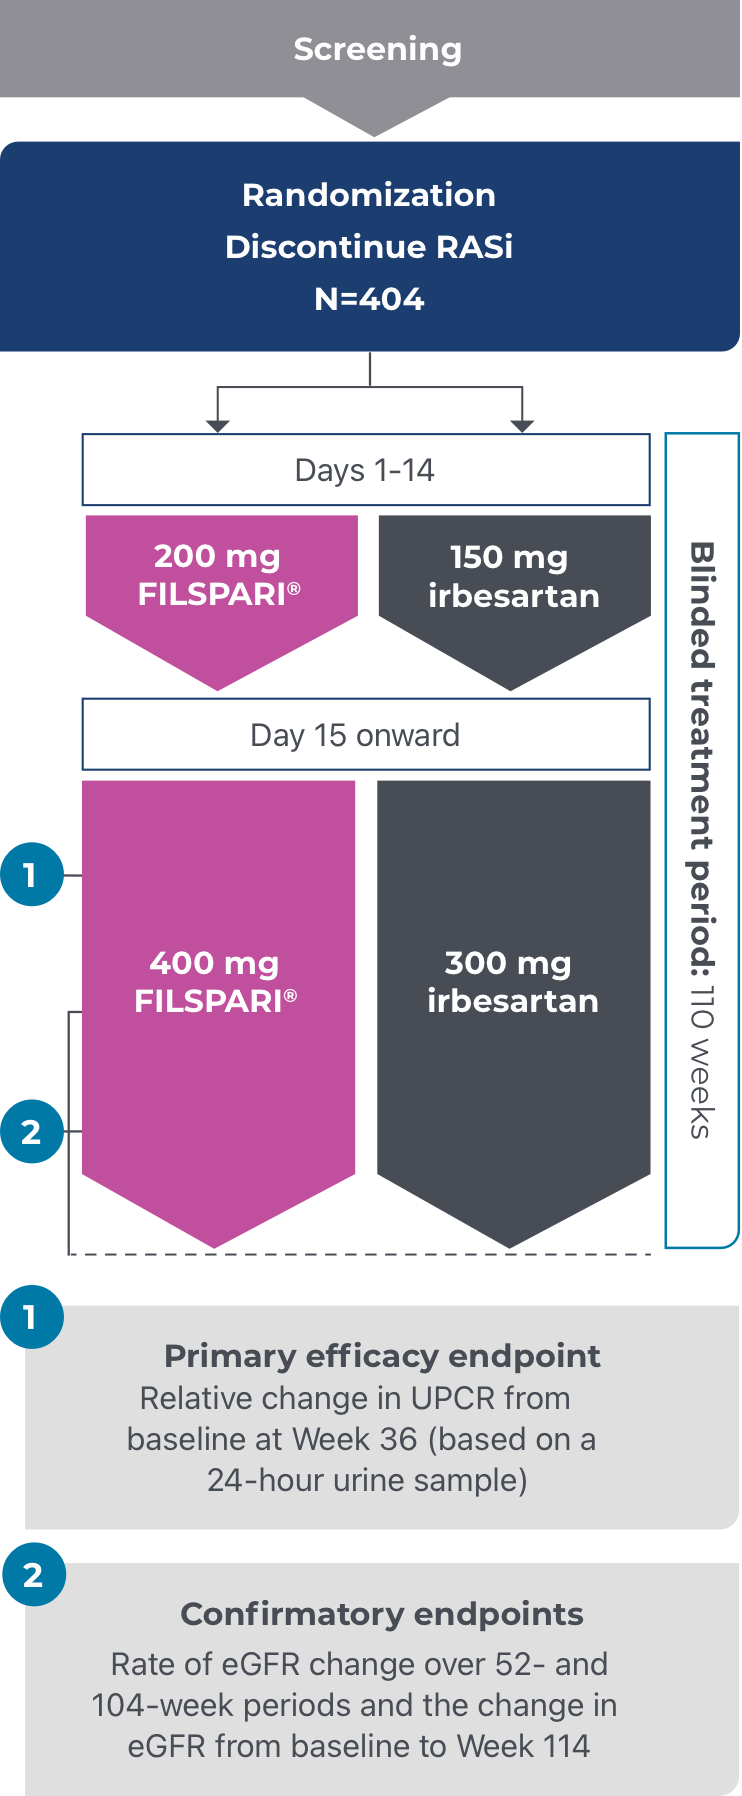 The PROTECT Study was a head-to-head trial designed to assess the efficacy and safety of FILSPARI versus irbesartan